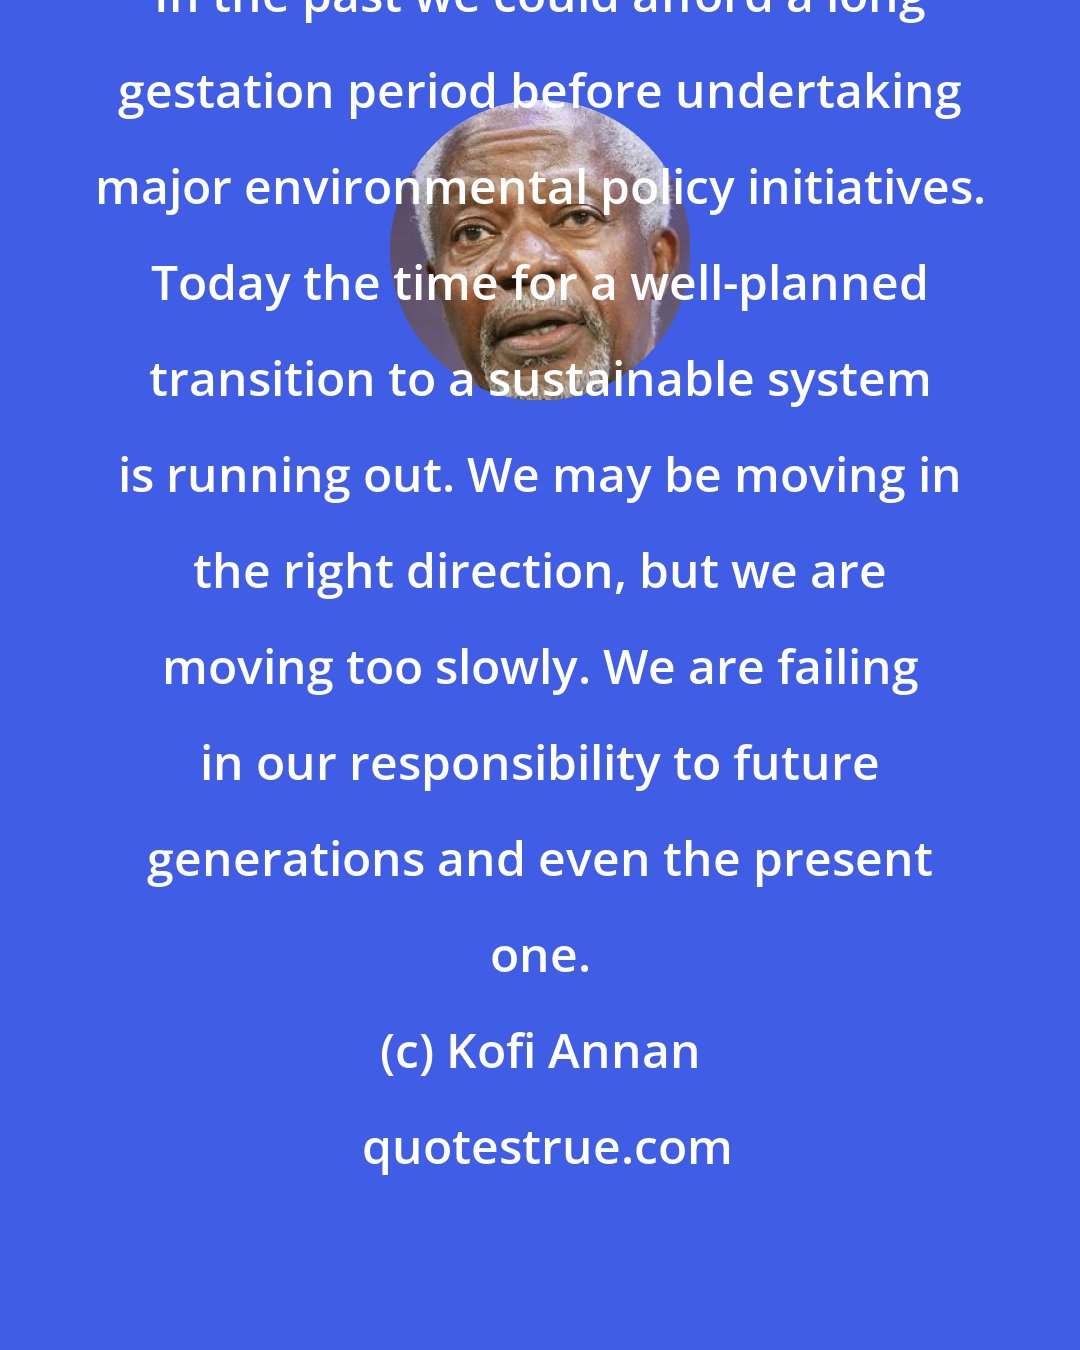 Kofi Annan: In the past we could afford a long gestation period before undertaking major environmental policy initiatives. Today the time for a well-planned transition to a sustainable system is running out. We may be moving in the right direction, but we are moving too slowly. We are failing in our responsibility to future generations and even the present one.